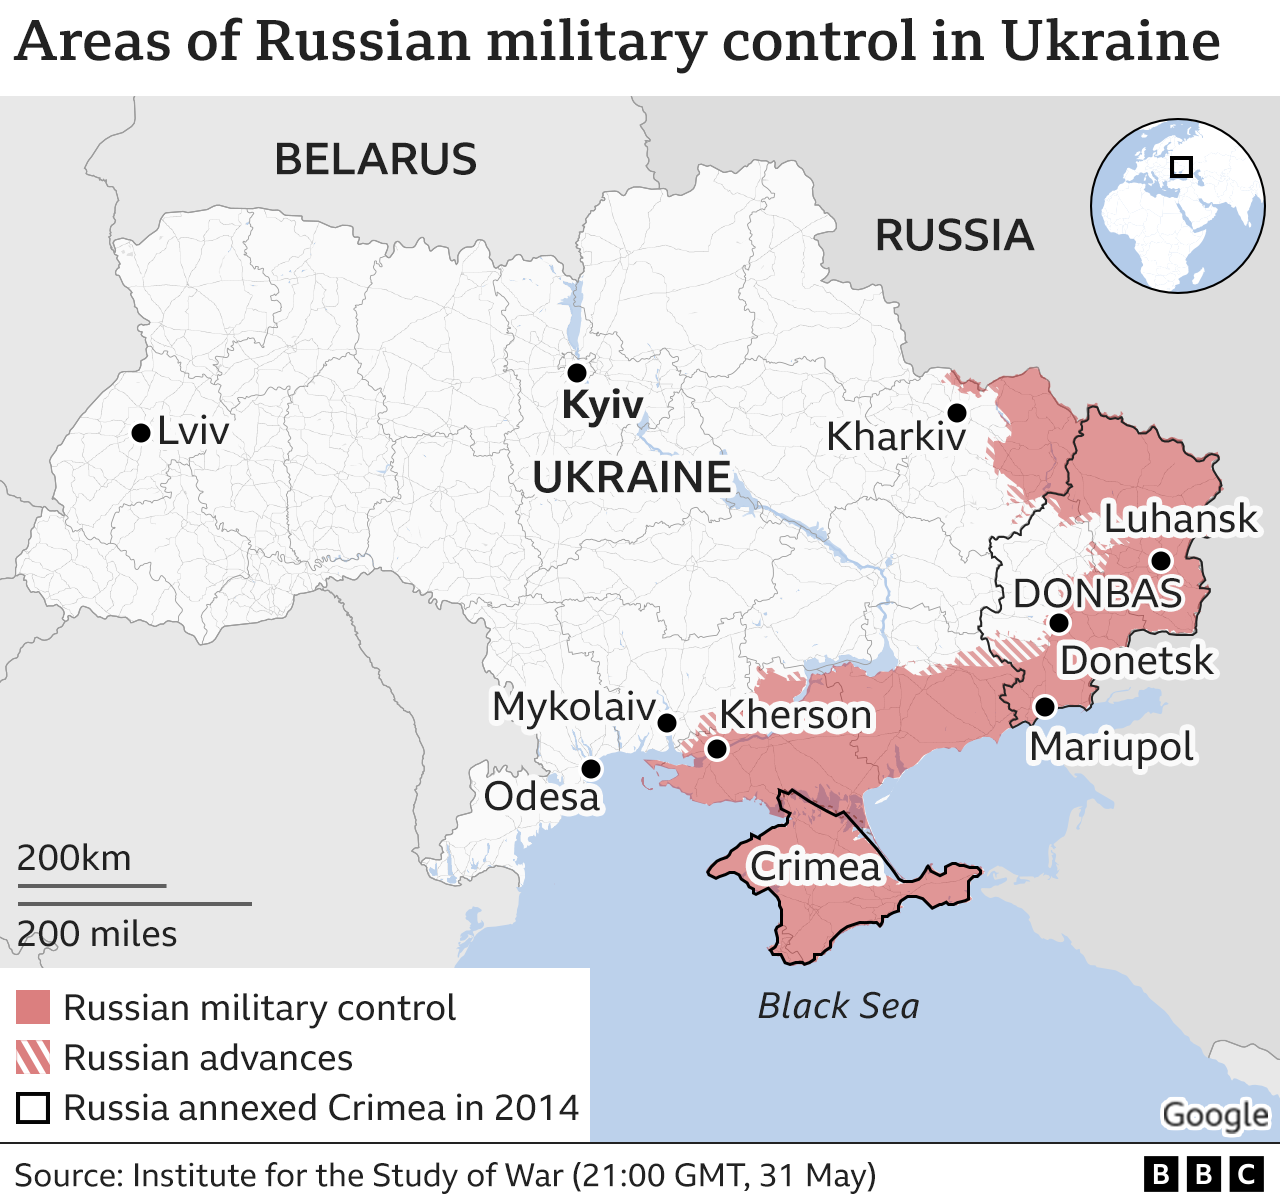 https://ichef.bbci.co.uk/news/976/cpsprodpb/CFC5/production/_124998135_ukraine_russian_control_areas_map-nc.png